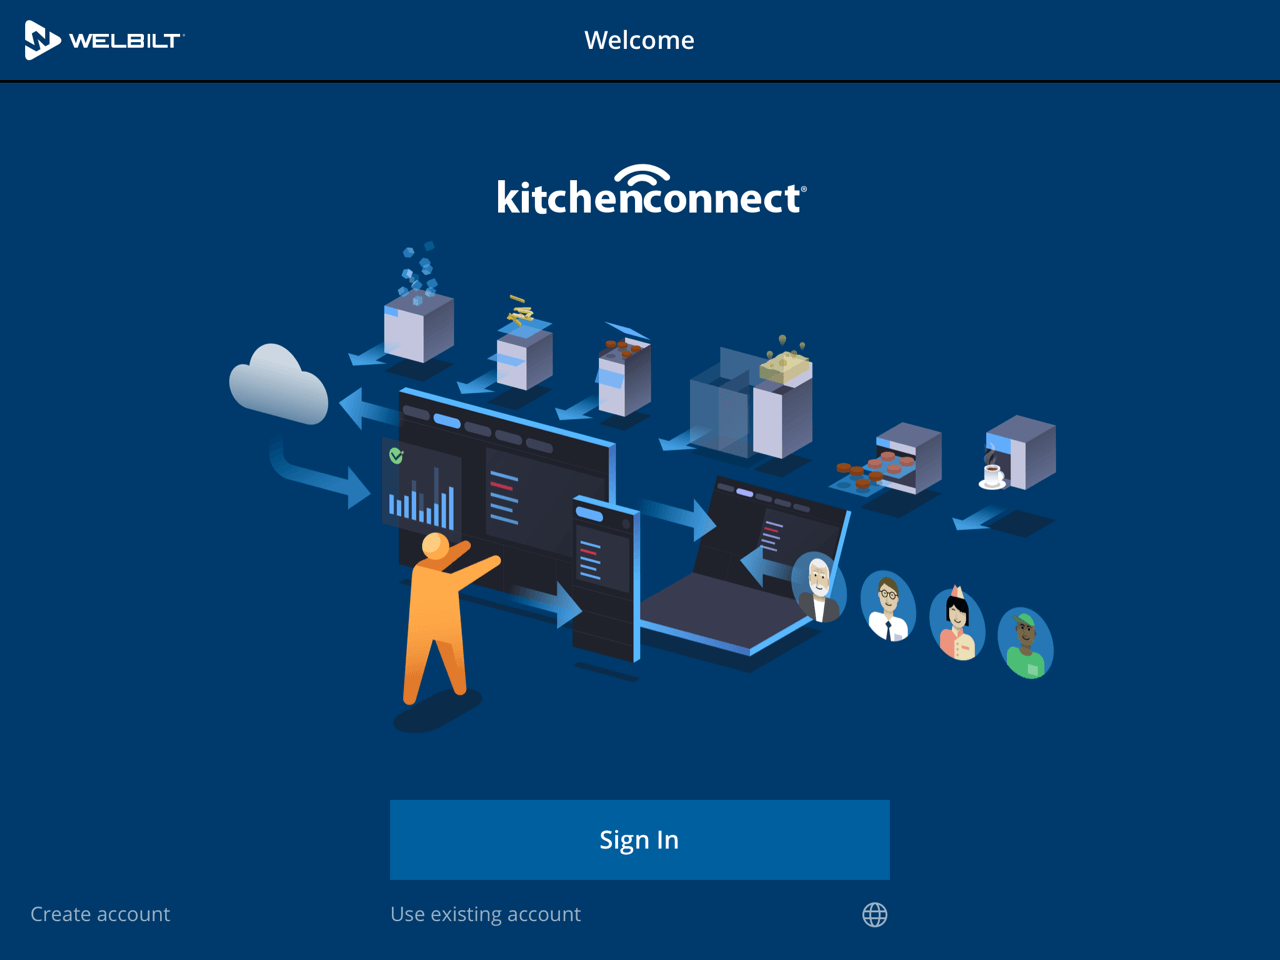 The start screen of the KitchenConnect Application from Welbilt shows an illustration of users and kitchen appliances in action.